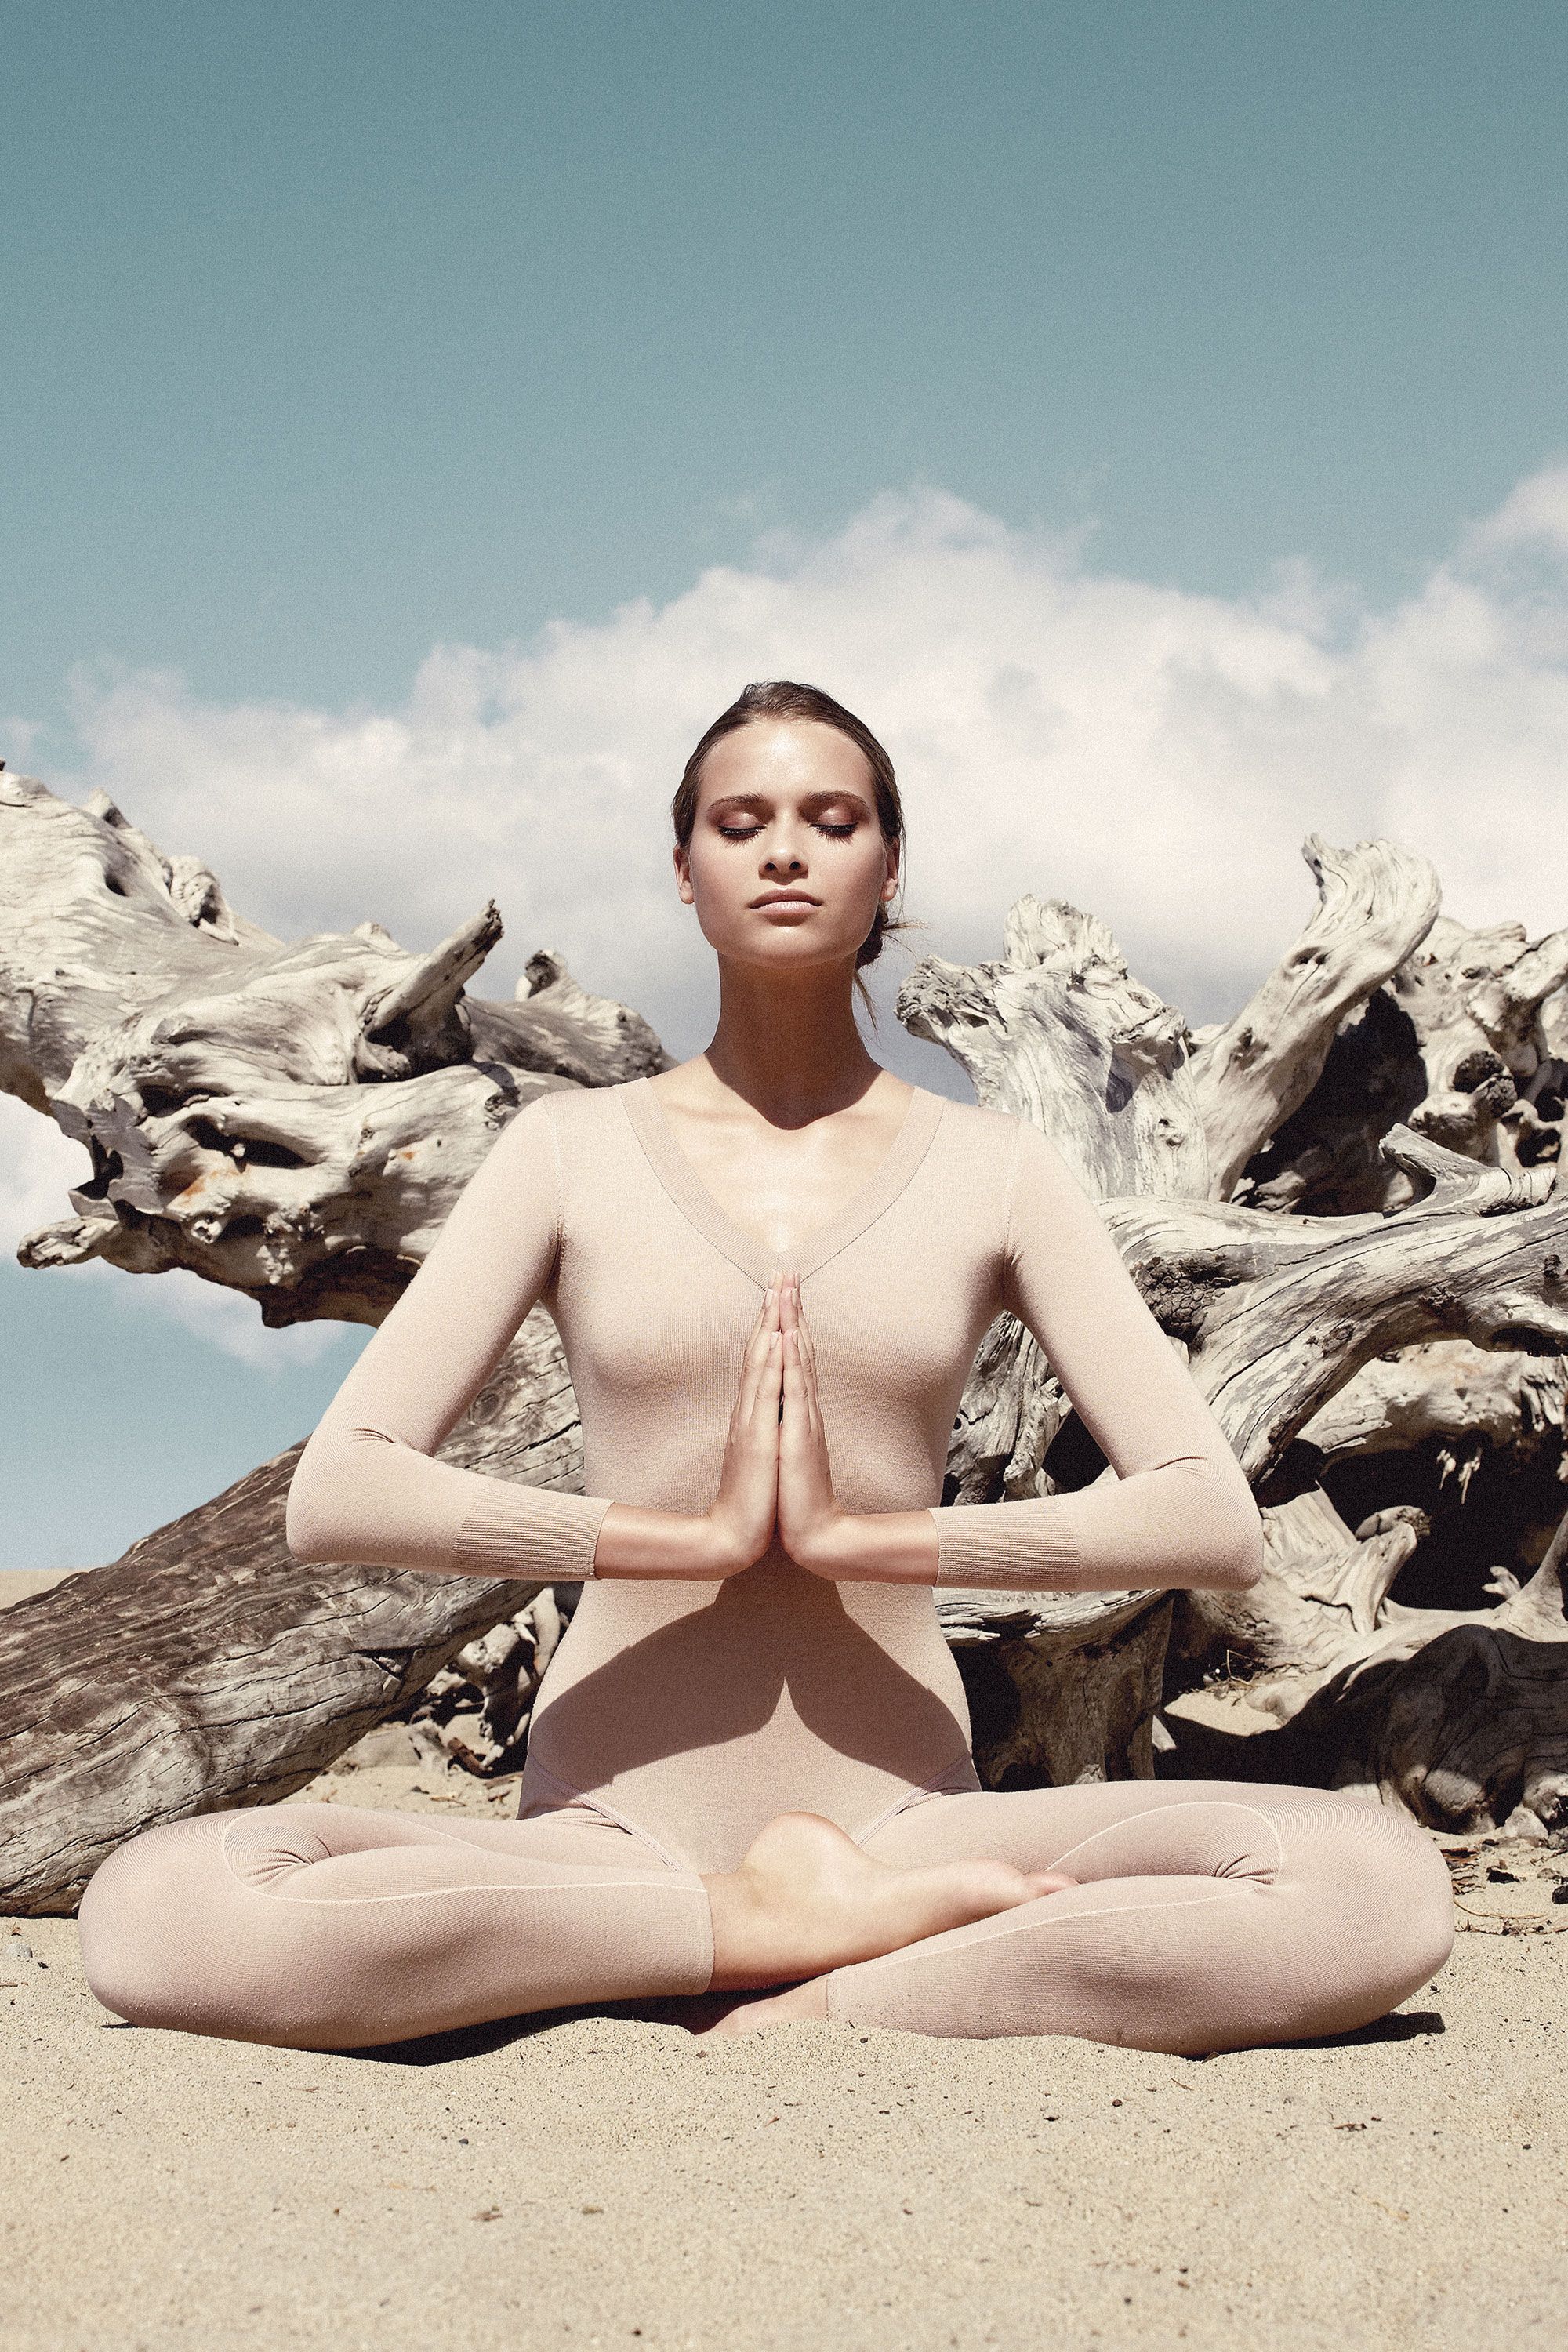 How to use meditation to feel calm